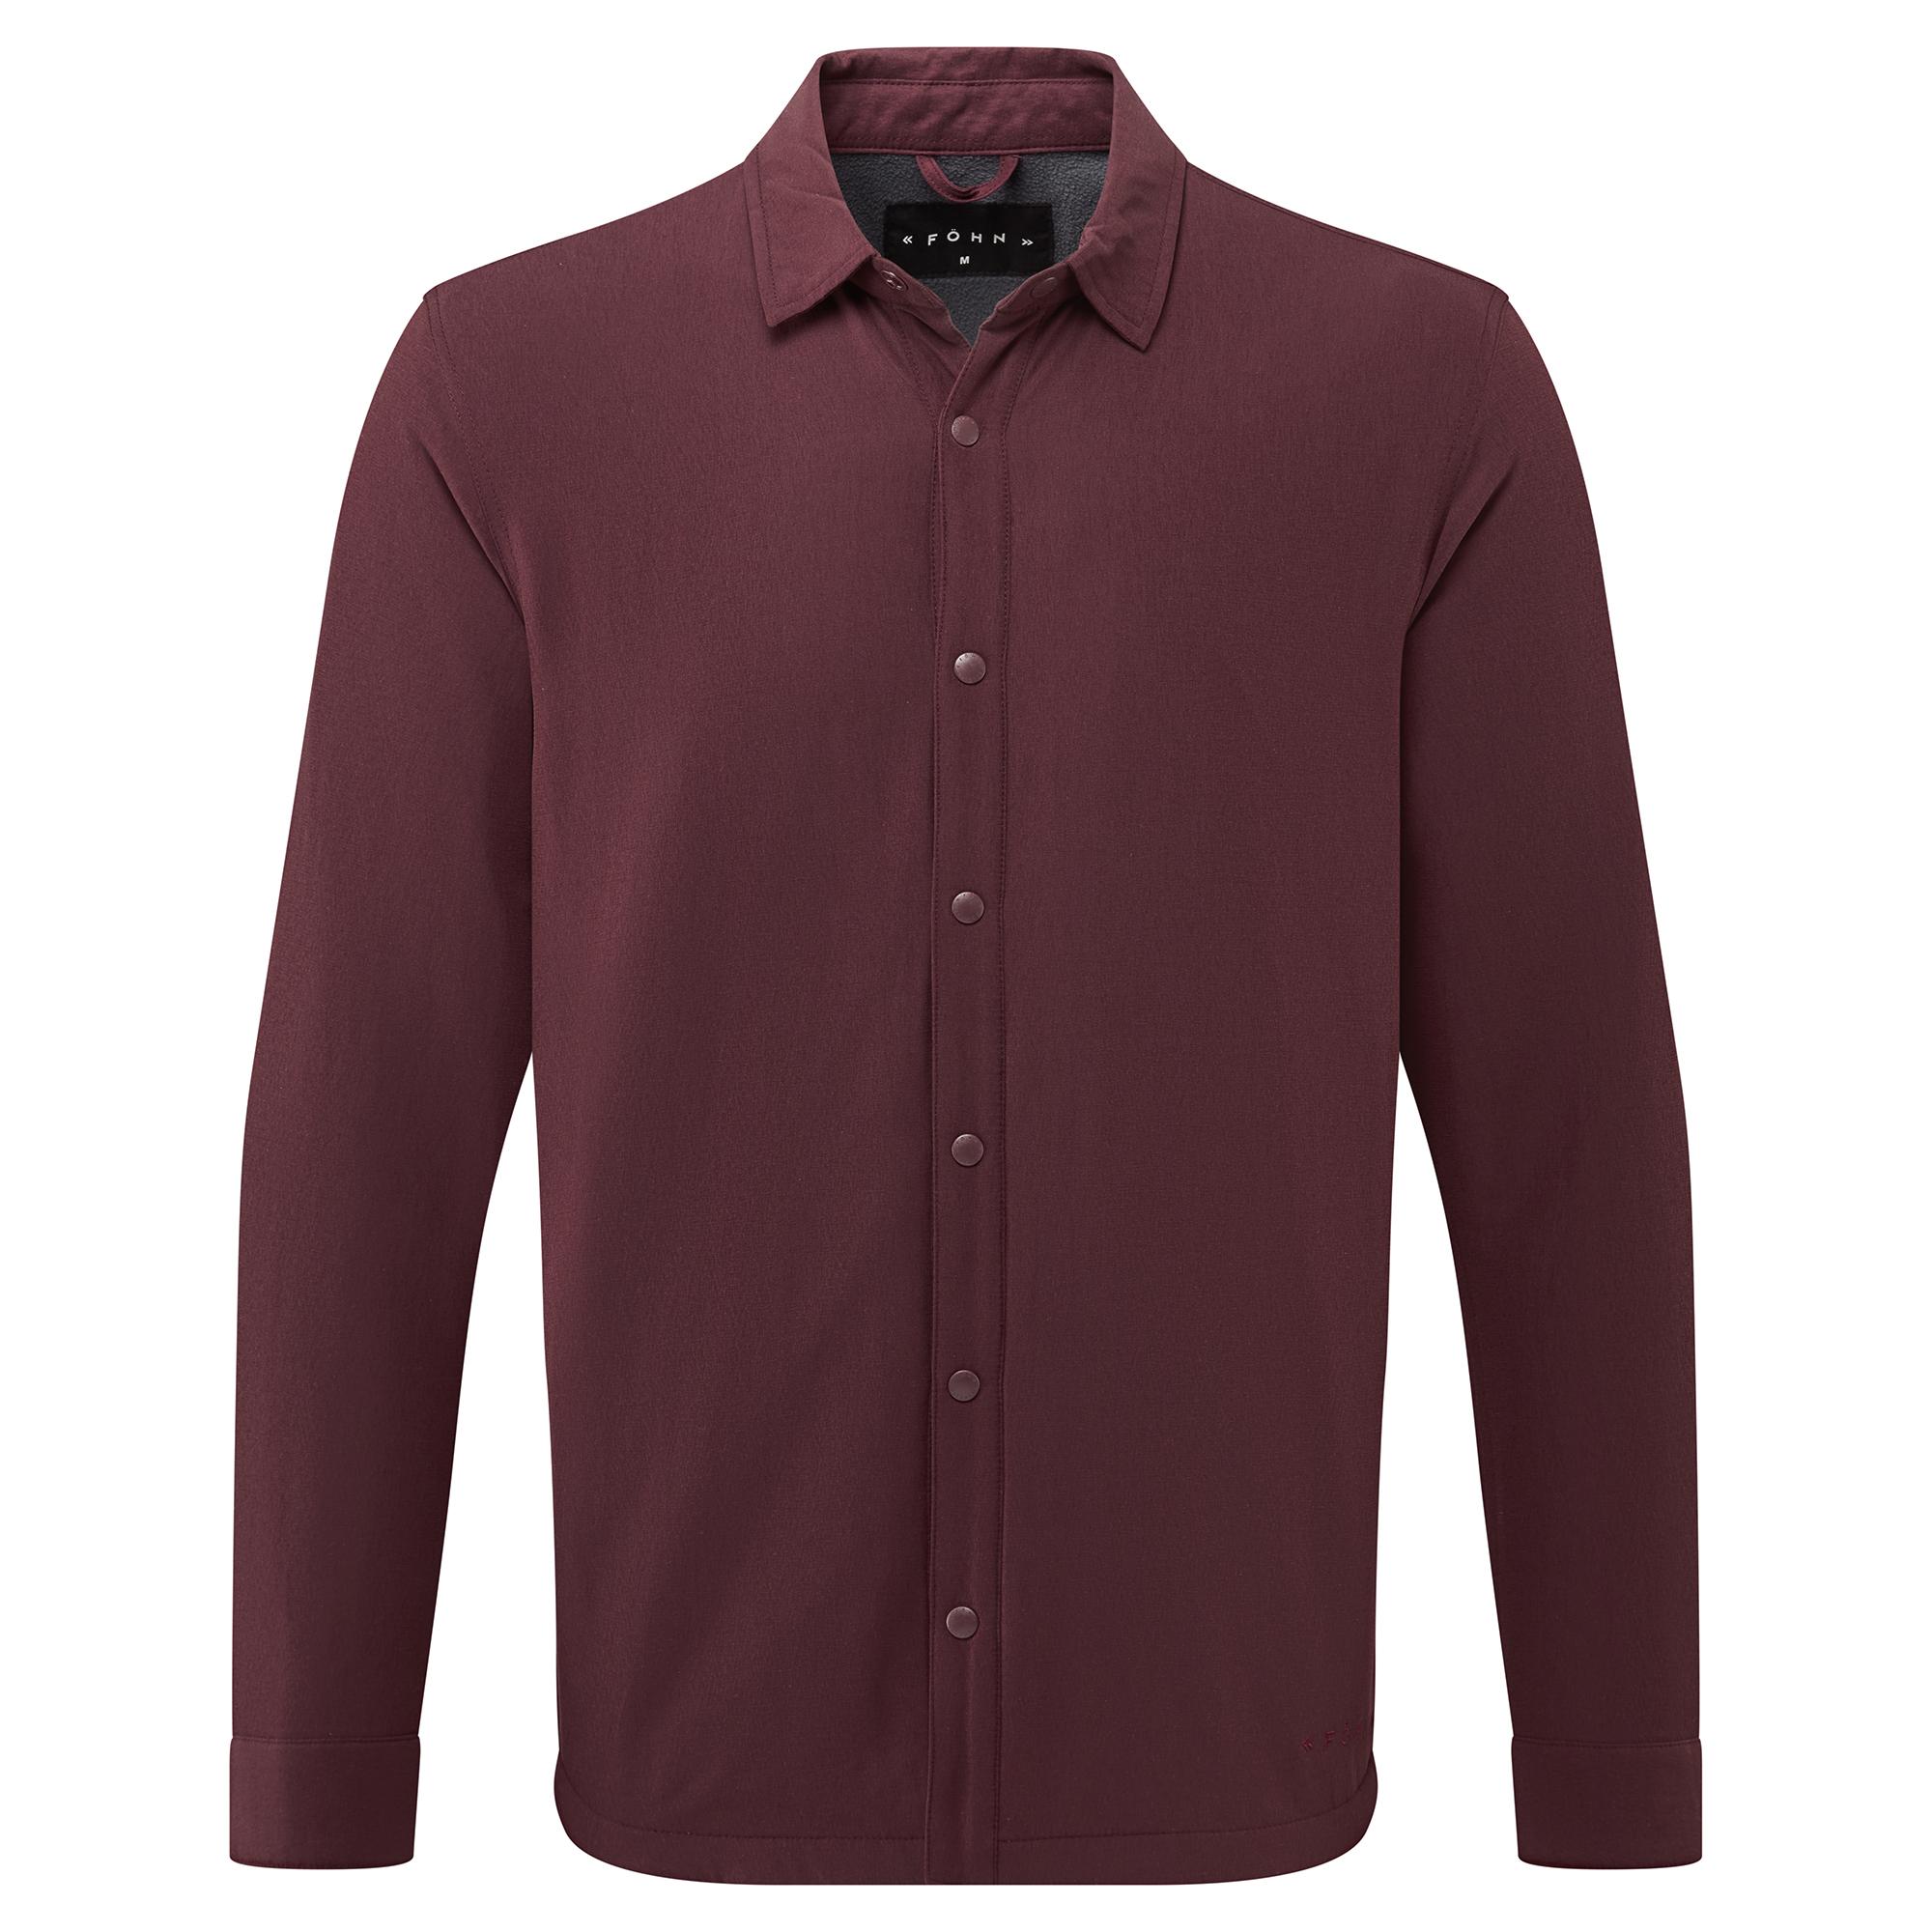 Fhn Mens Insulated Shirt - Port Royale